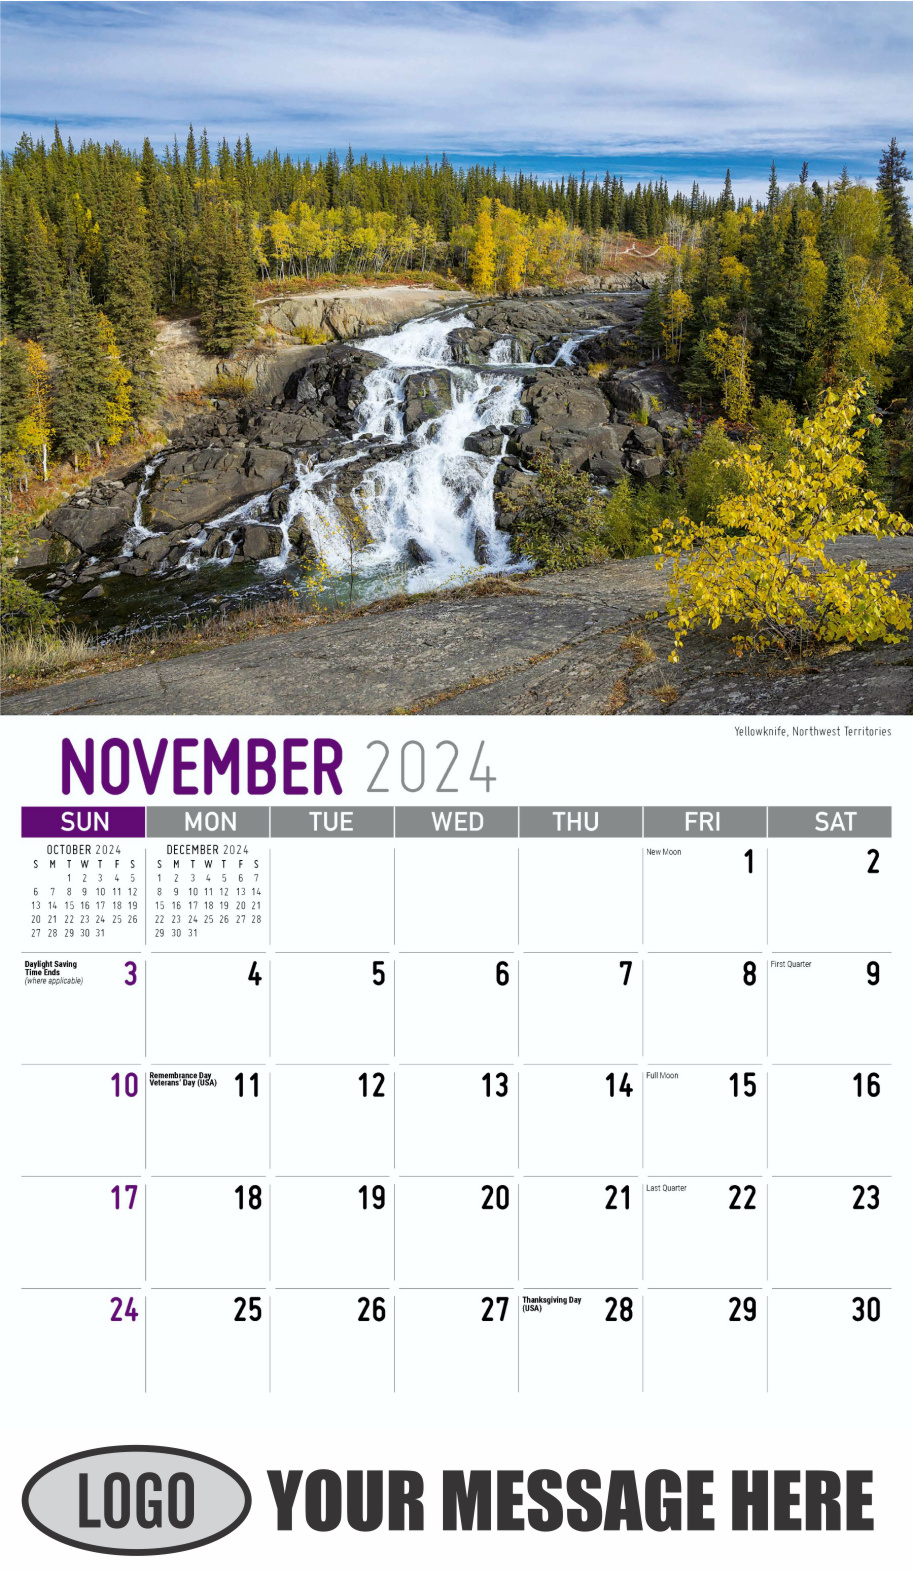 Scenes of Western Canada 2024 Business Promotional Wall Calendar - November